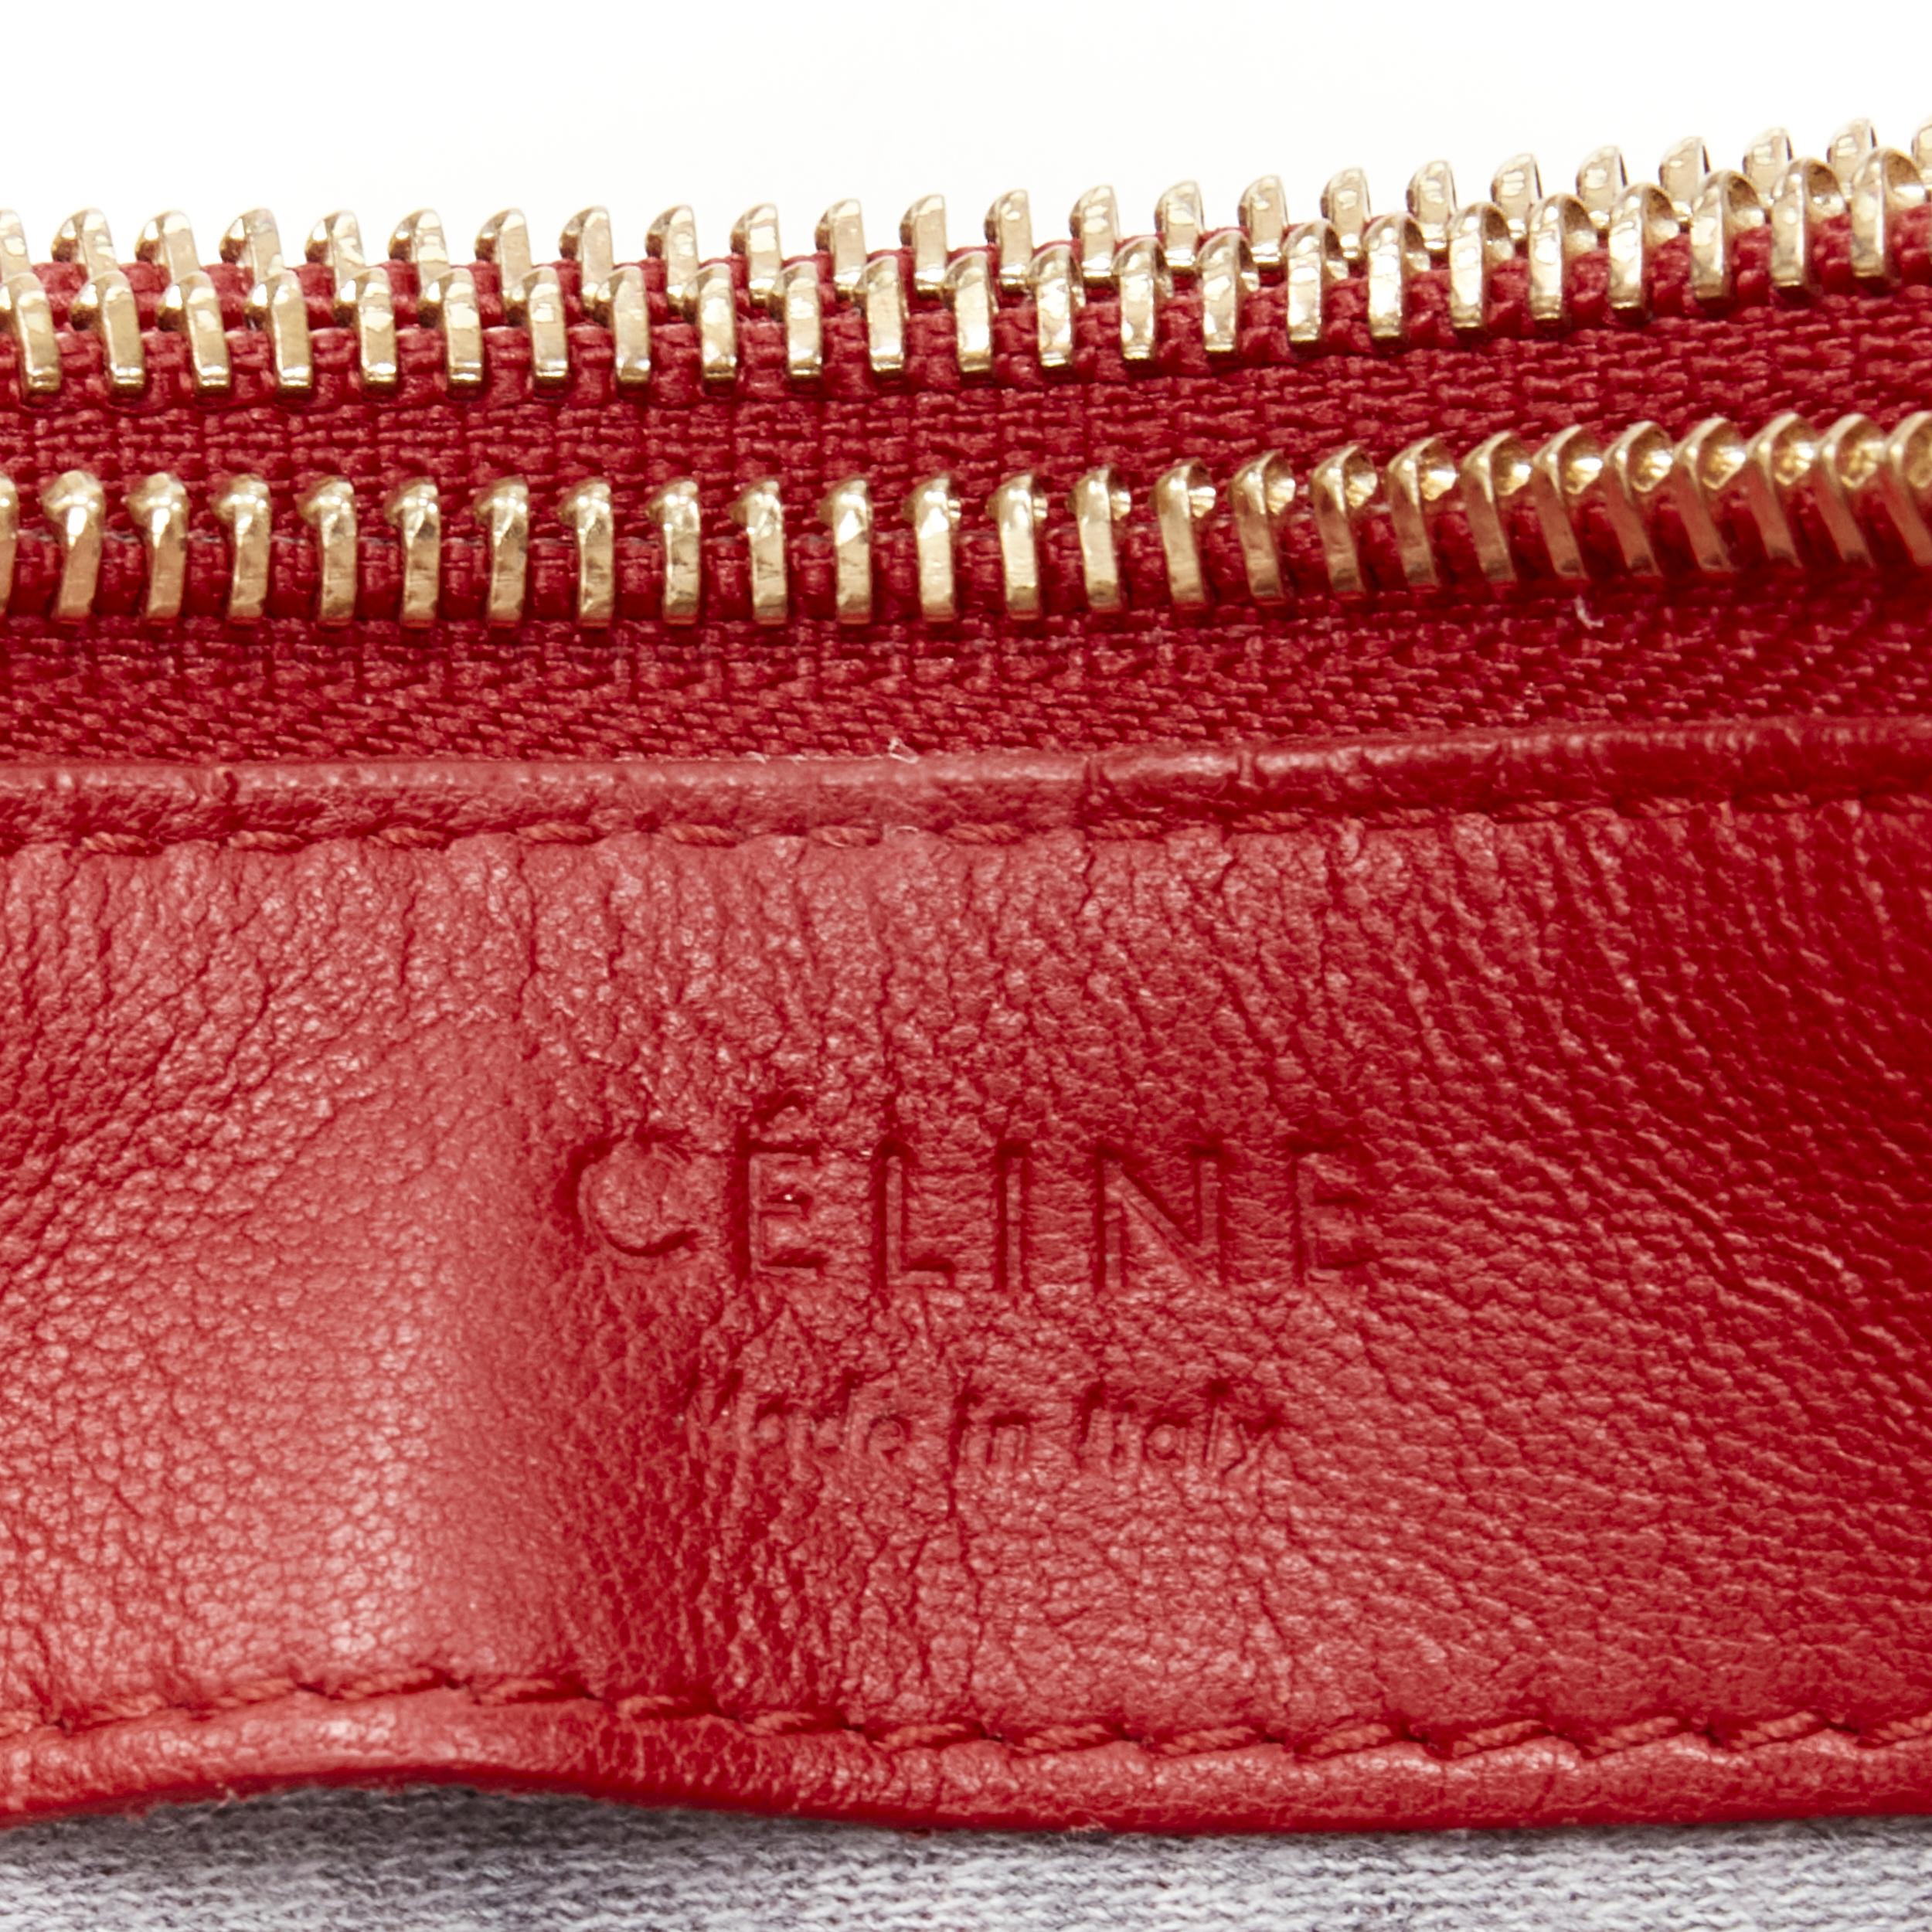 OLD CELINE Phoebe Philo red leather snap pocket Trio Pouch zip crossbody 1